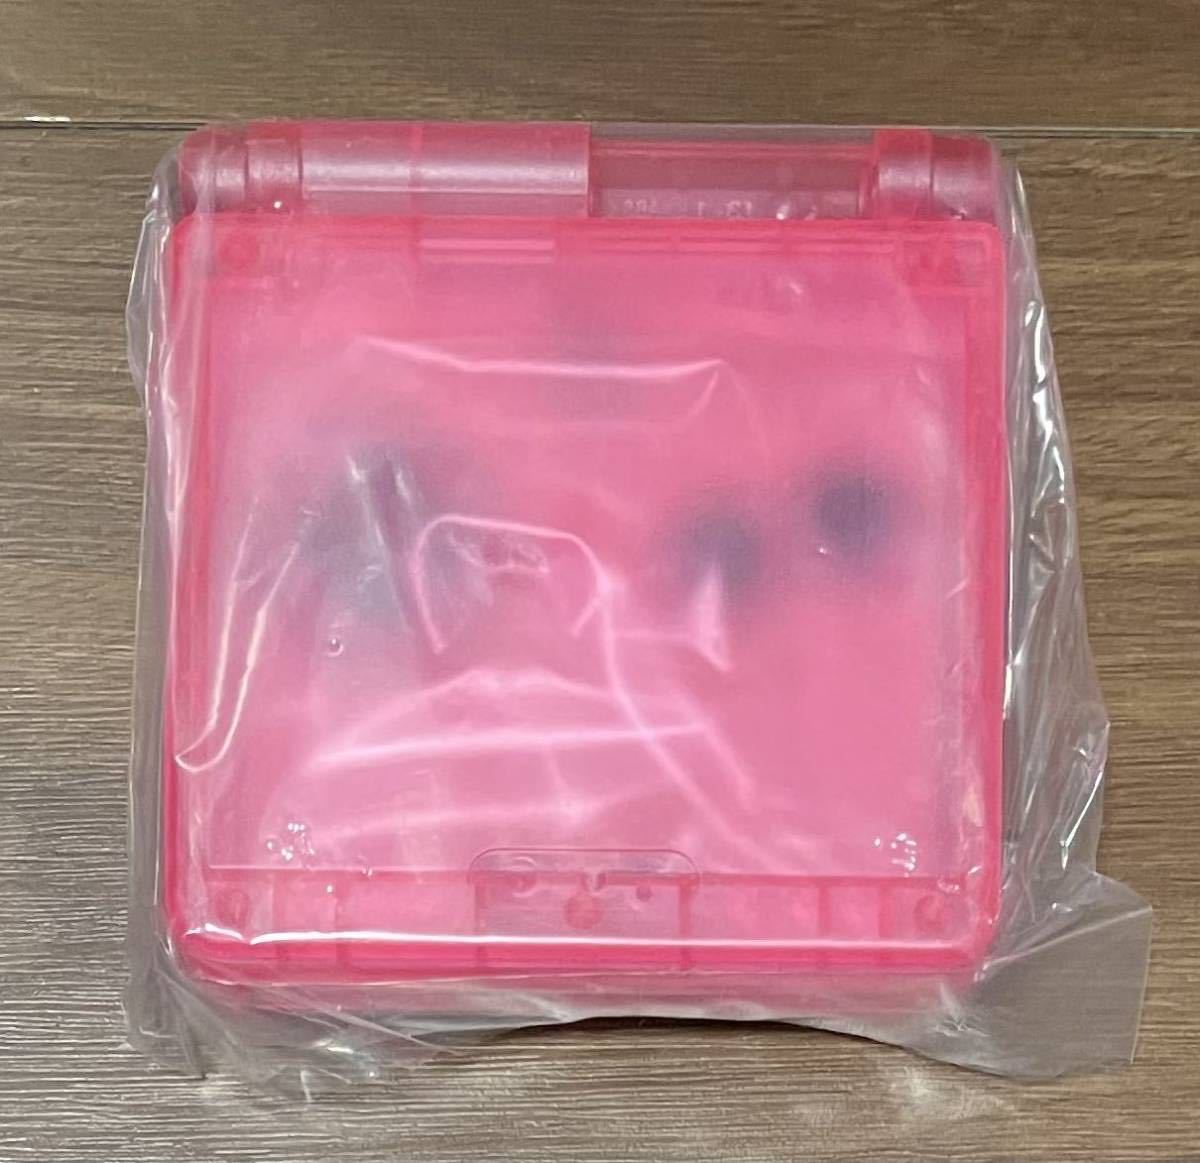  Game Boy Advance SP for after market goods new goods shell clear pink ②